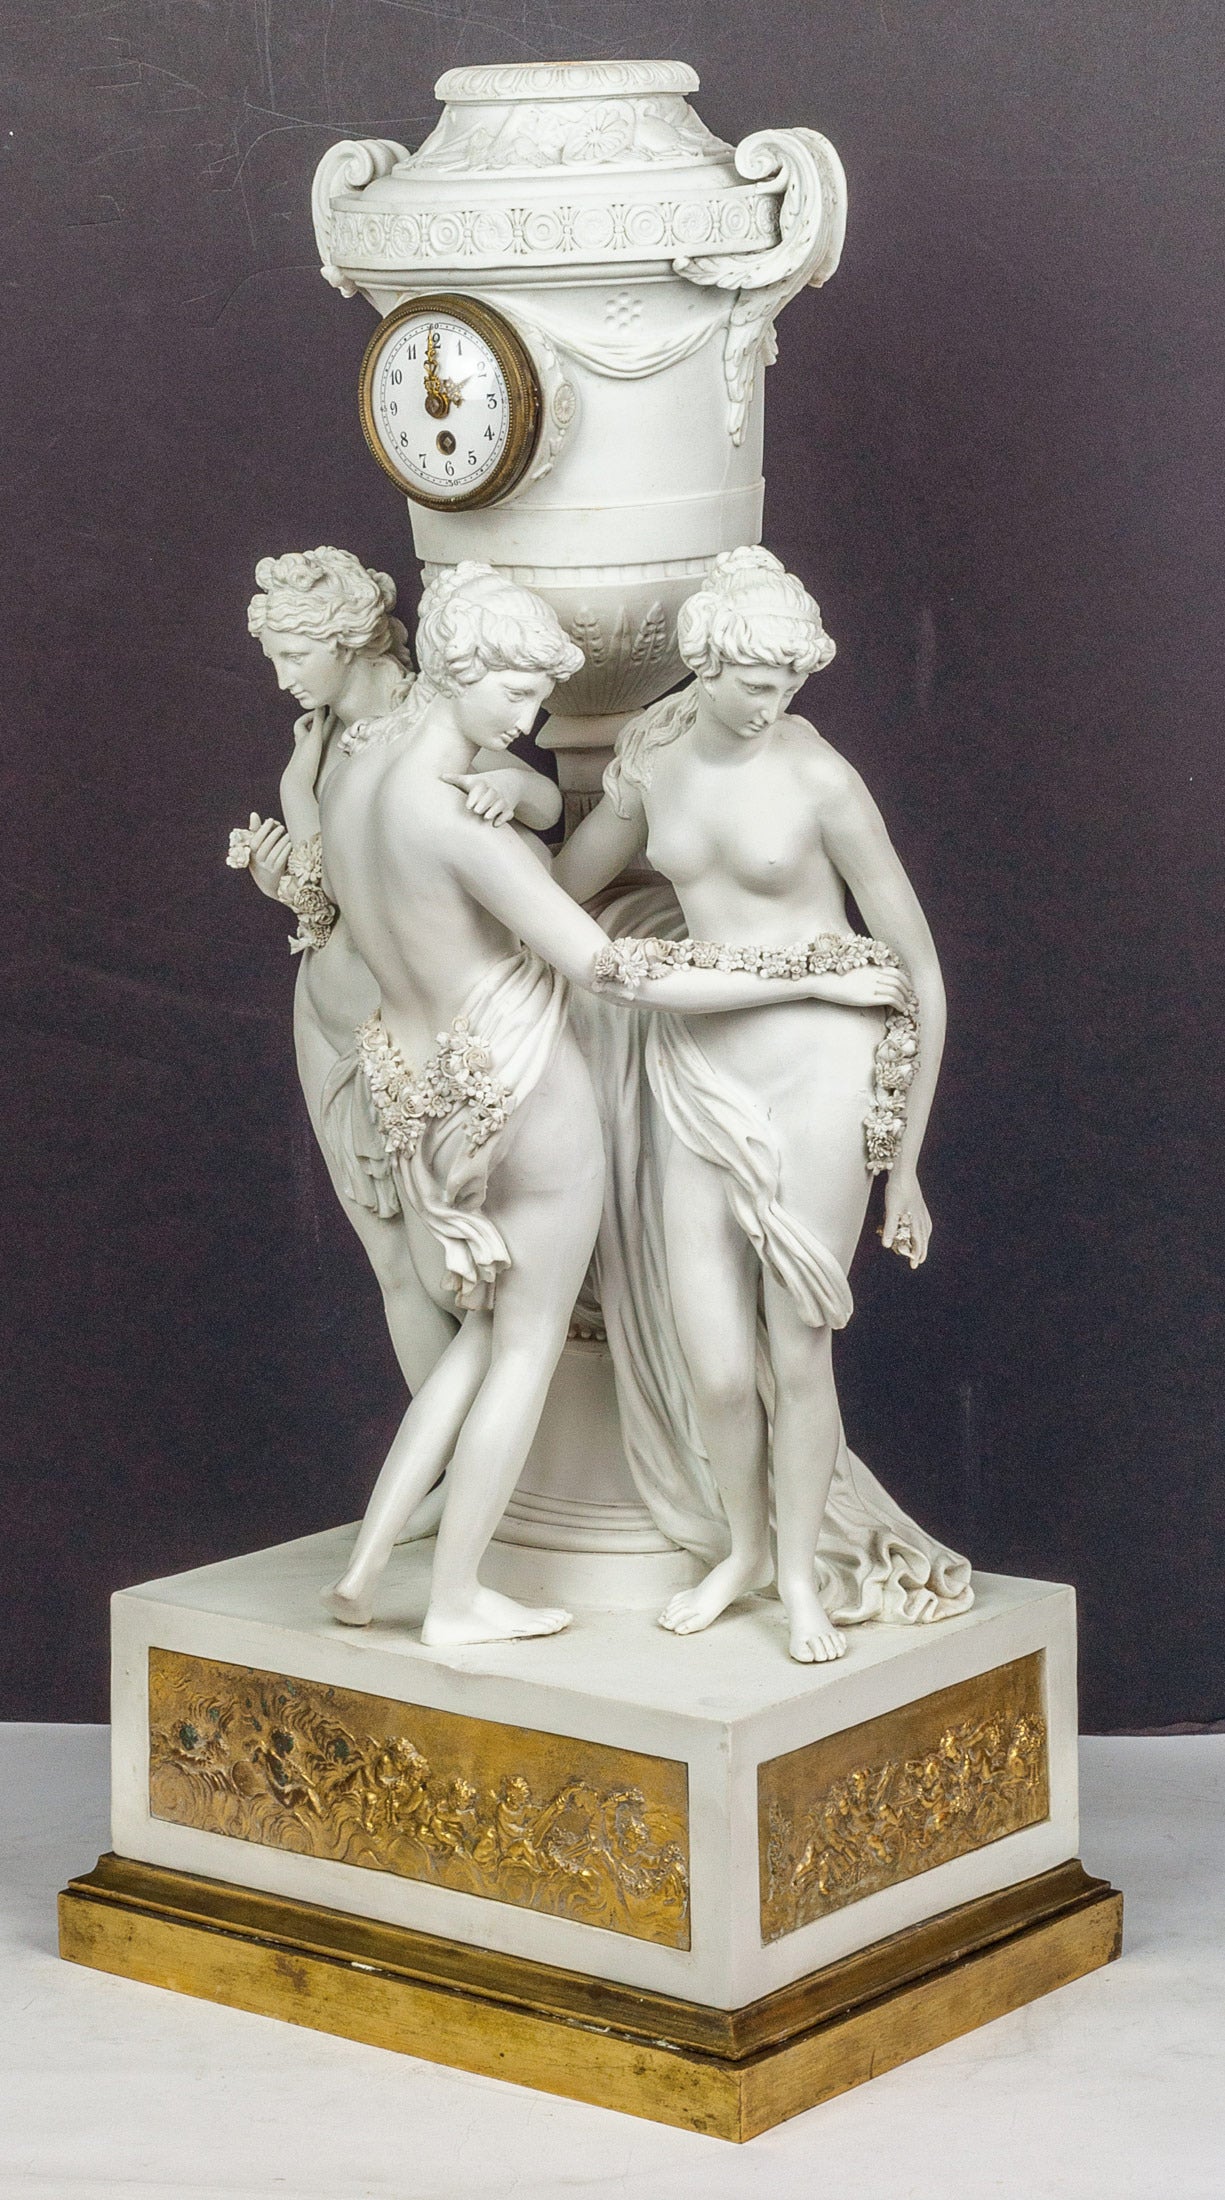 Neoclassical French Bisque Porcelain Figural Mantel Clock with Nude Figures 1